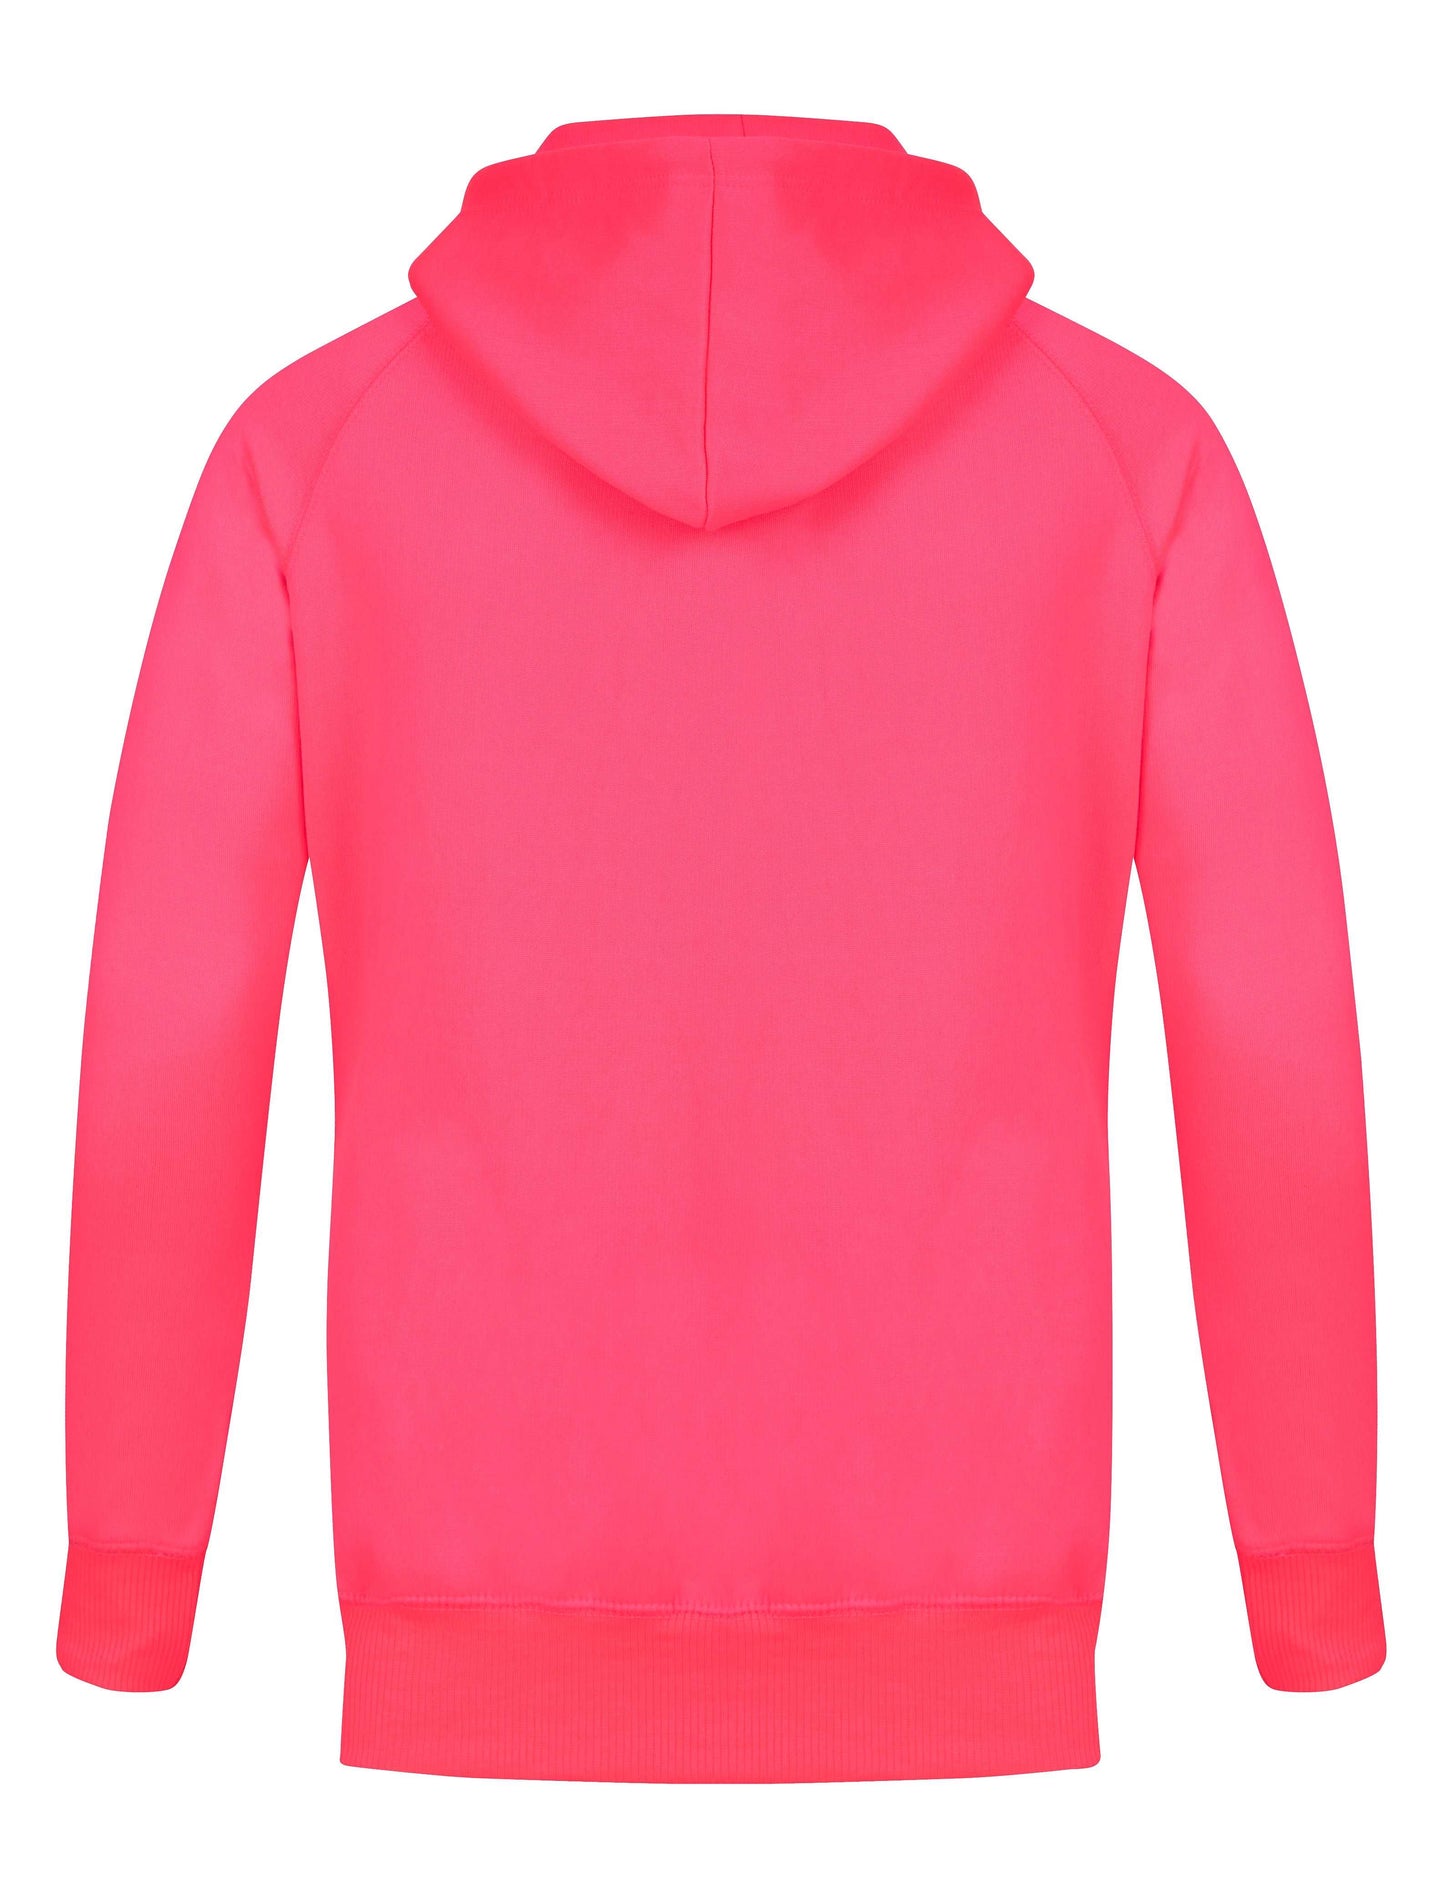 YUNG'N'RICH HOODIE - colour Neon Pink back view 